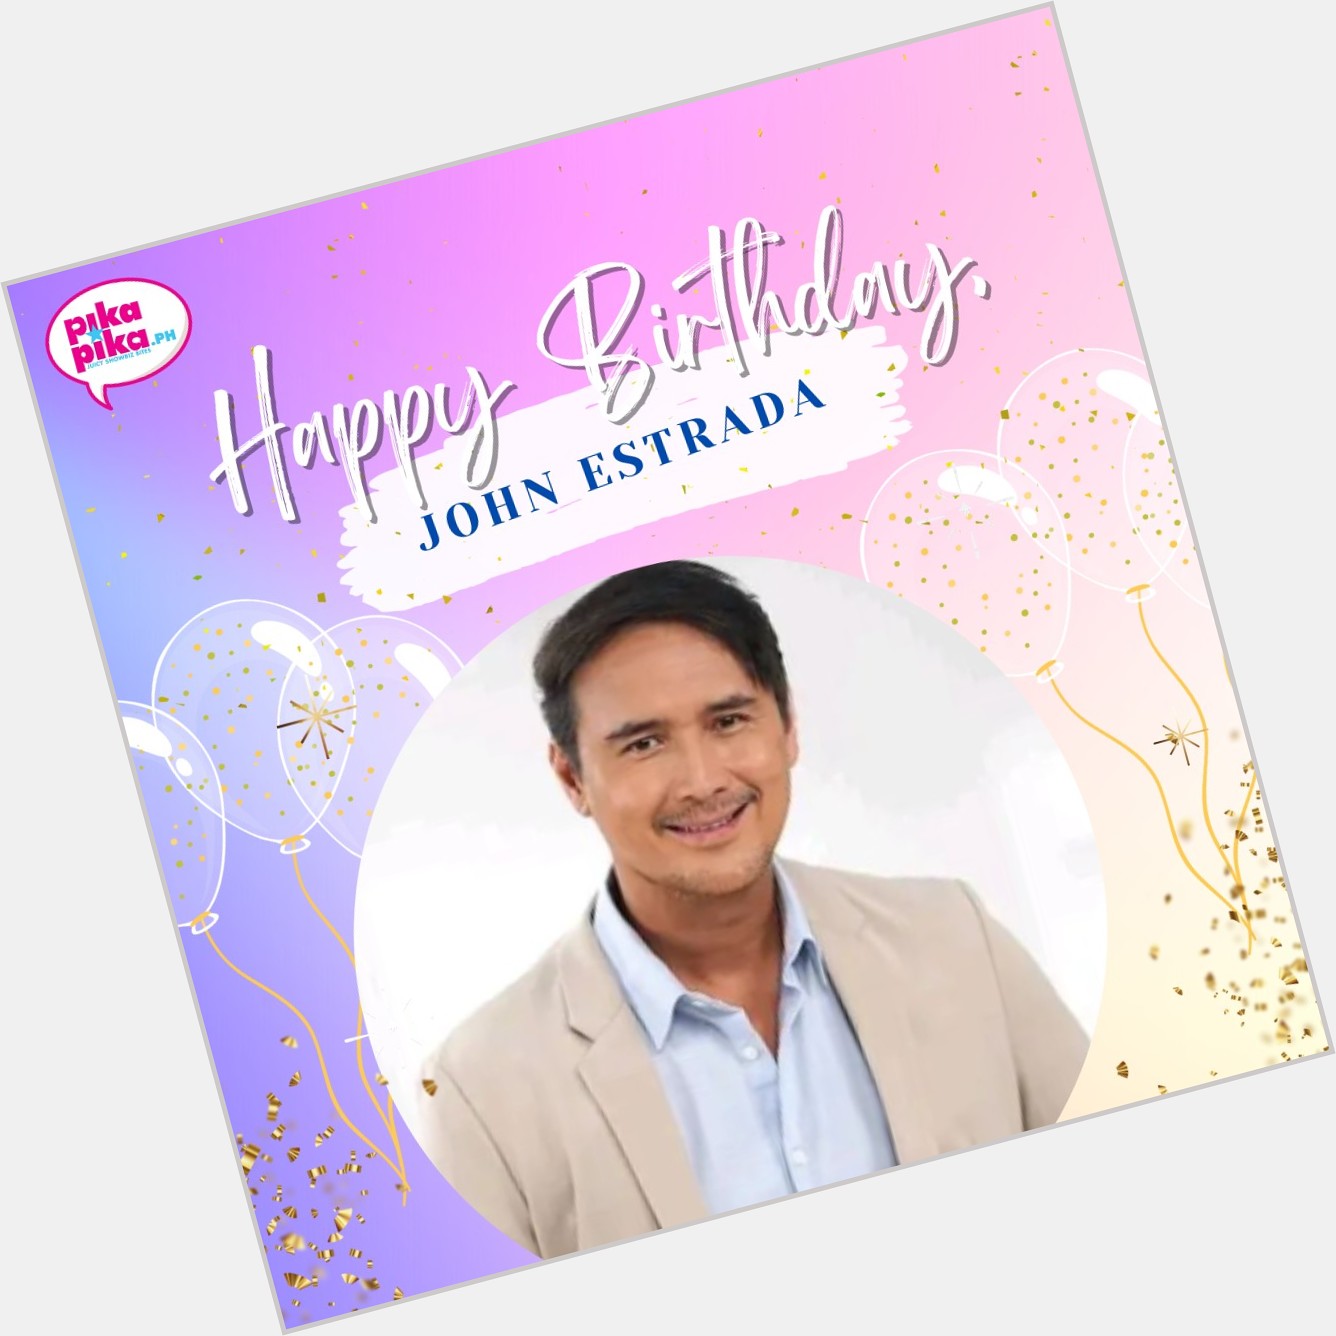 Happy birthday, John Estrada! May your special day be filled with love and cheers.    